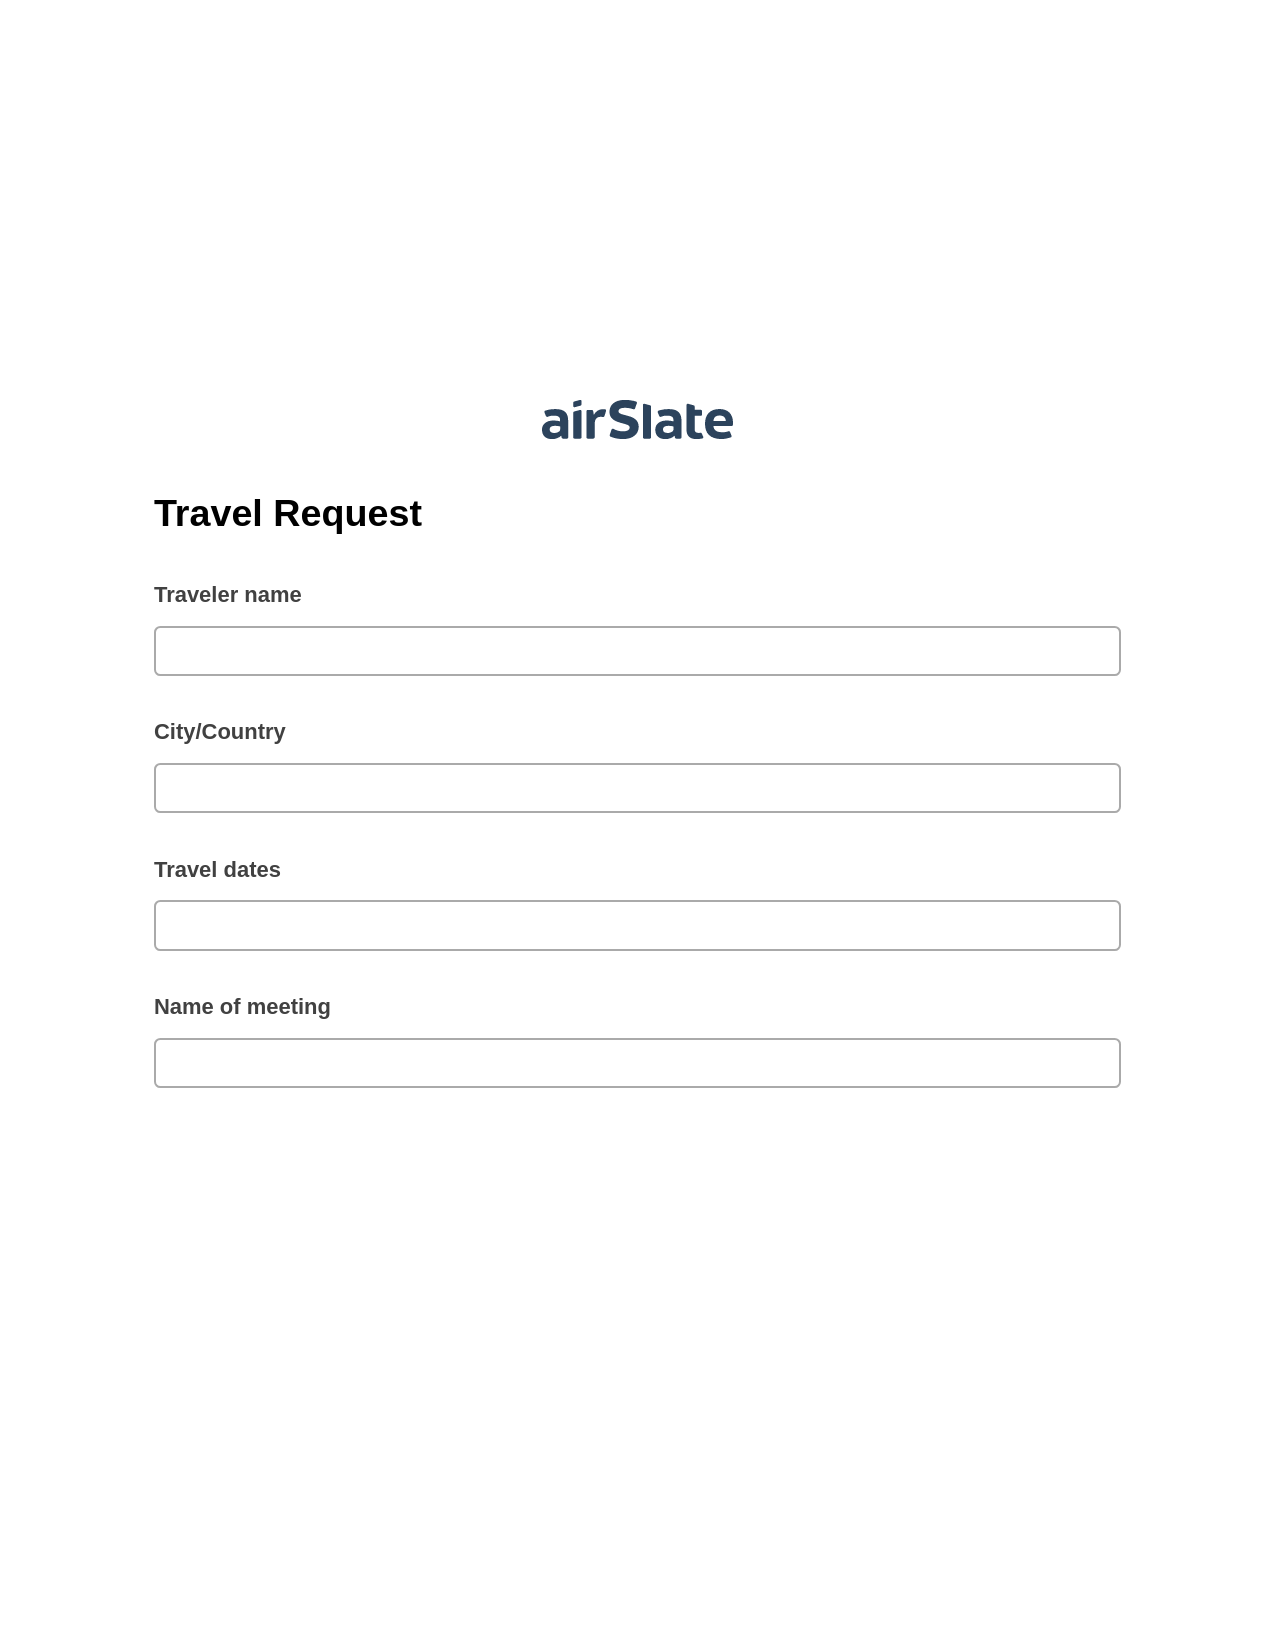 Travel Request Pre-fill from Salesforce Records with SOQL Bot, SendGrid send Campaign bot, Dropbox Bot